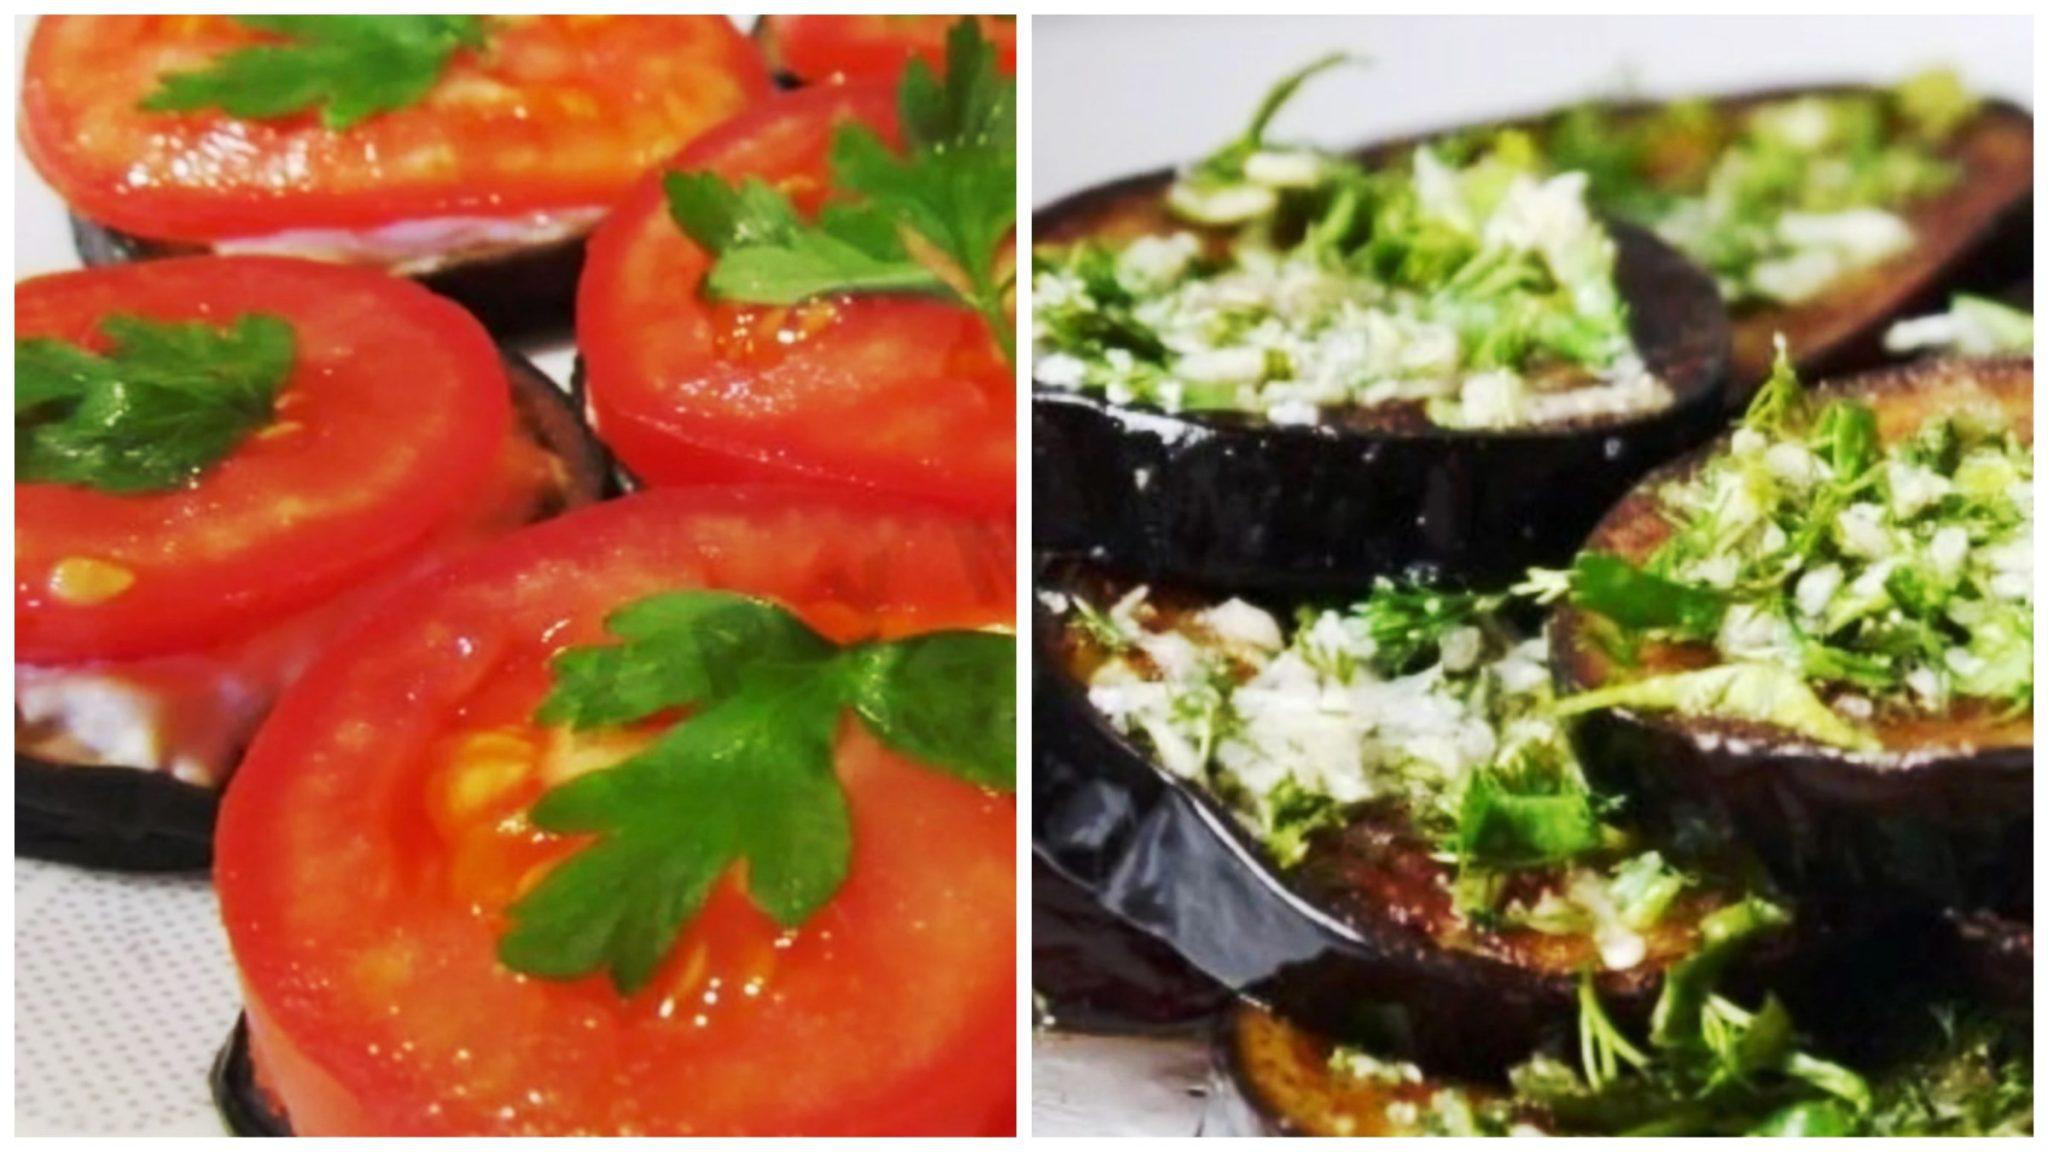 Baked eggplant in the oven, which tastes like pan-fried